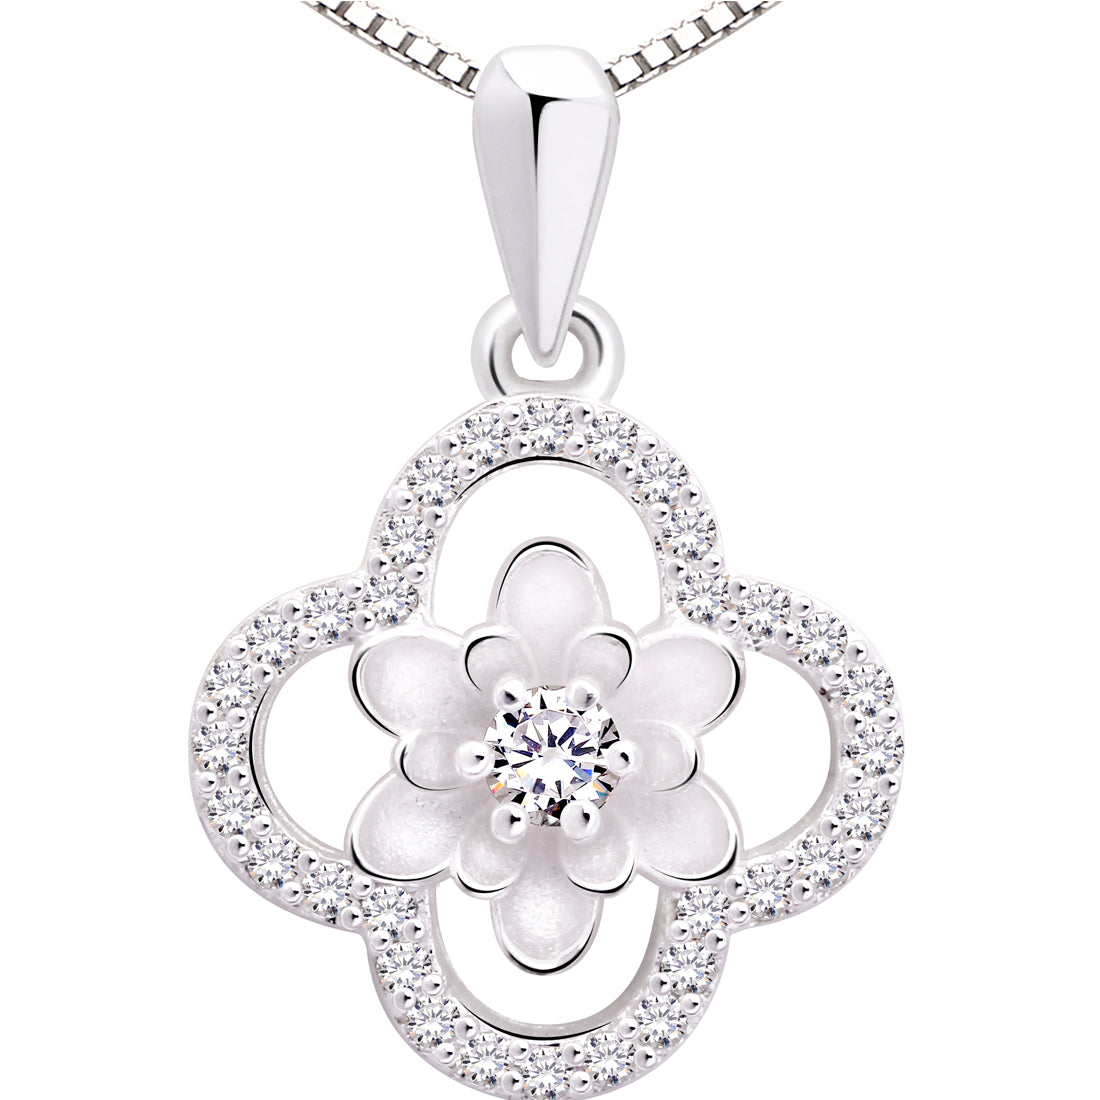 ALOV Jewelry Sterling Silver Four Leaf Clover Cubic Zirconia Pendant Necklace